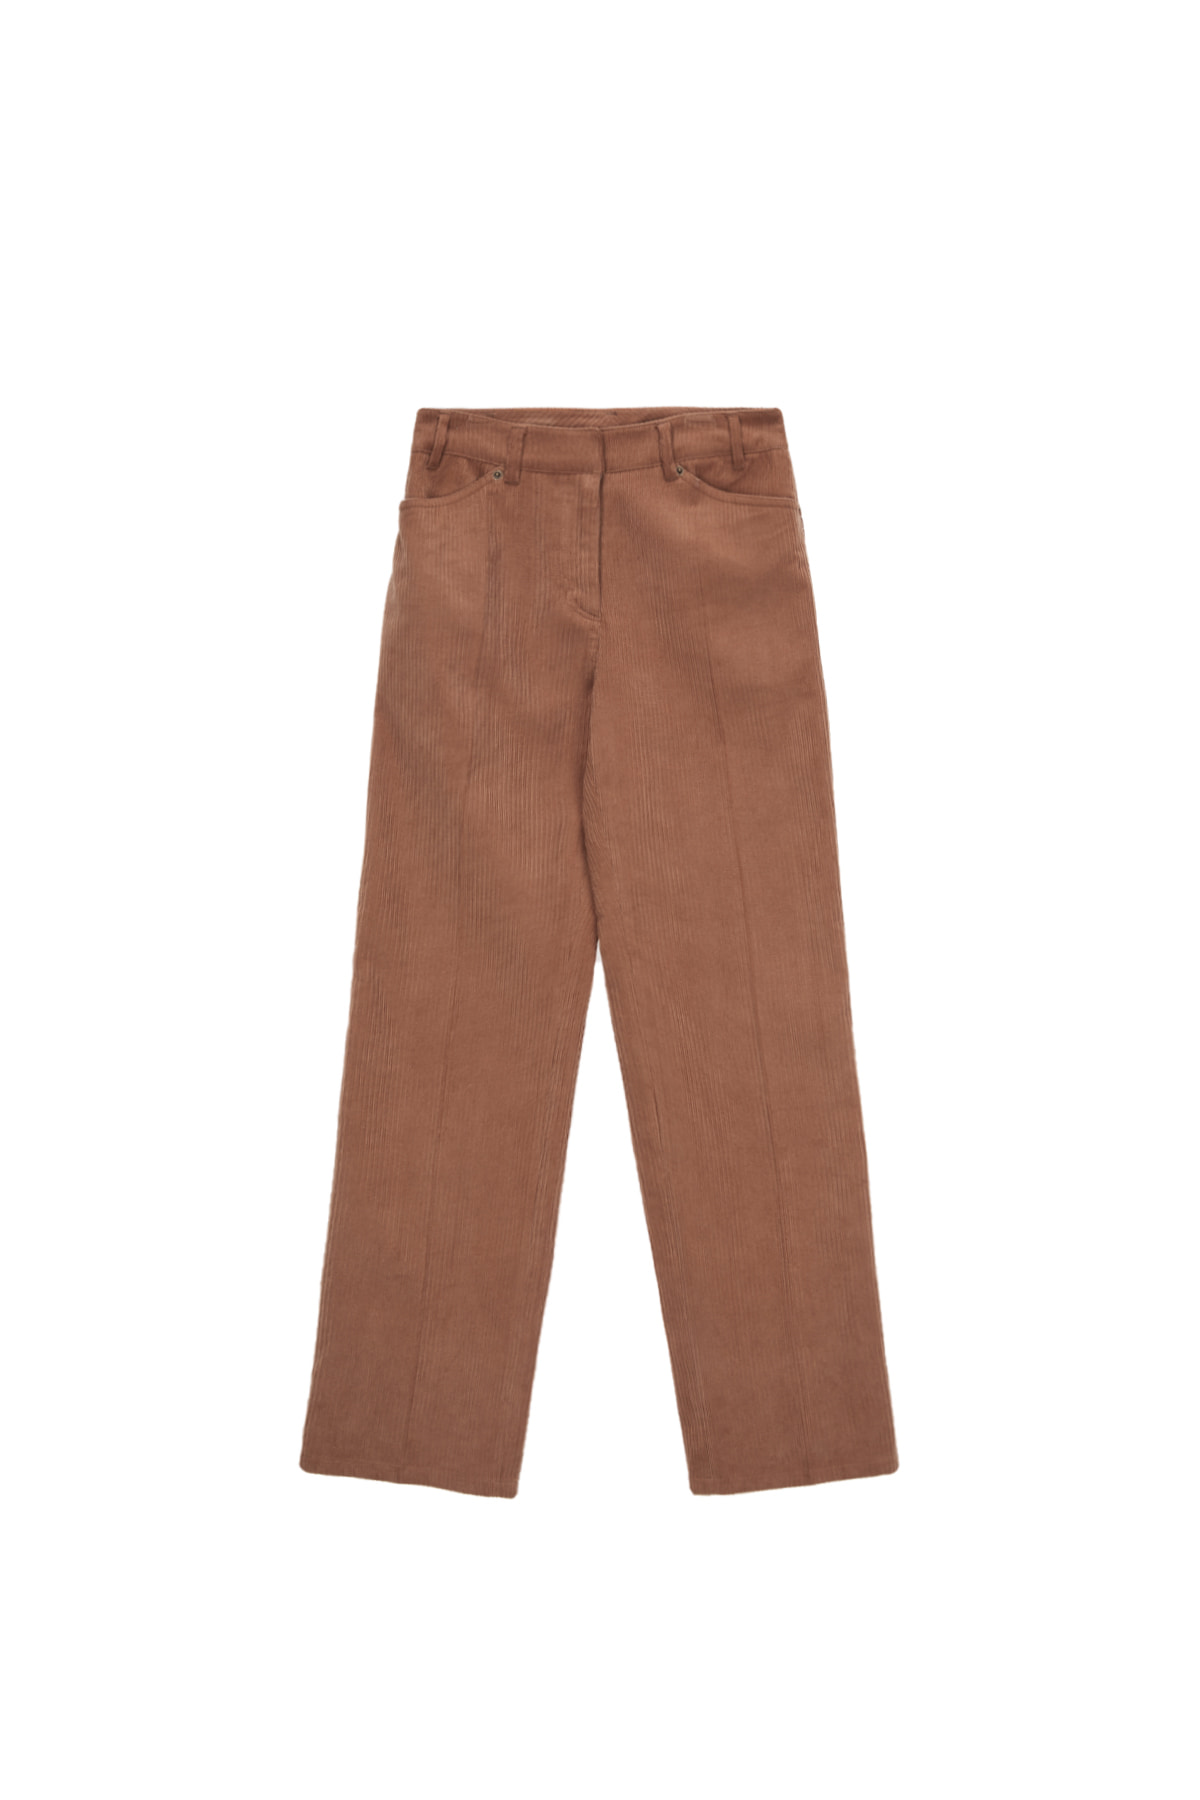 CORDUROY BOOTS CUT TROUSER IN CAMEL